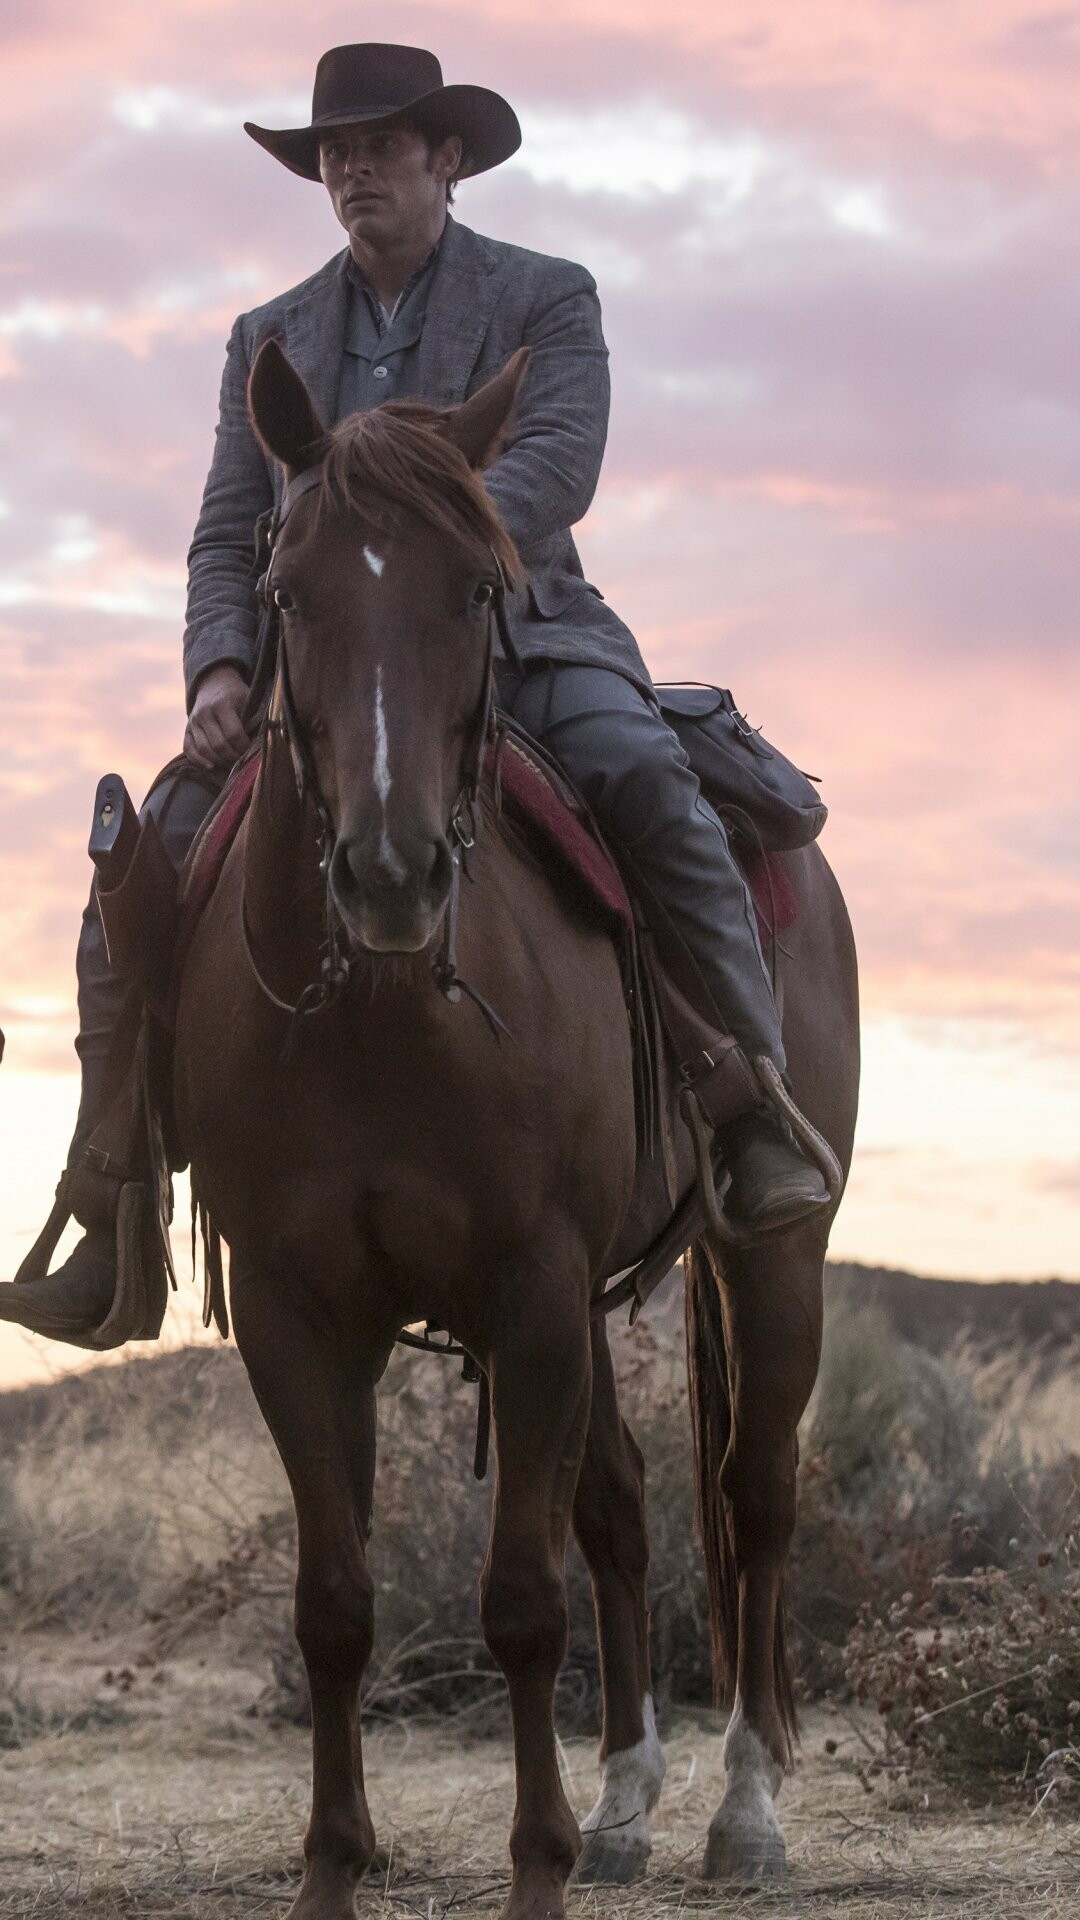 Westworld: James Marsden, A gunfighter returning to Sweetwater to find Dolores. 1080x1920 Full HD Wallpaper.